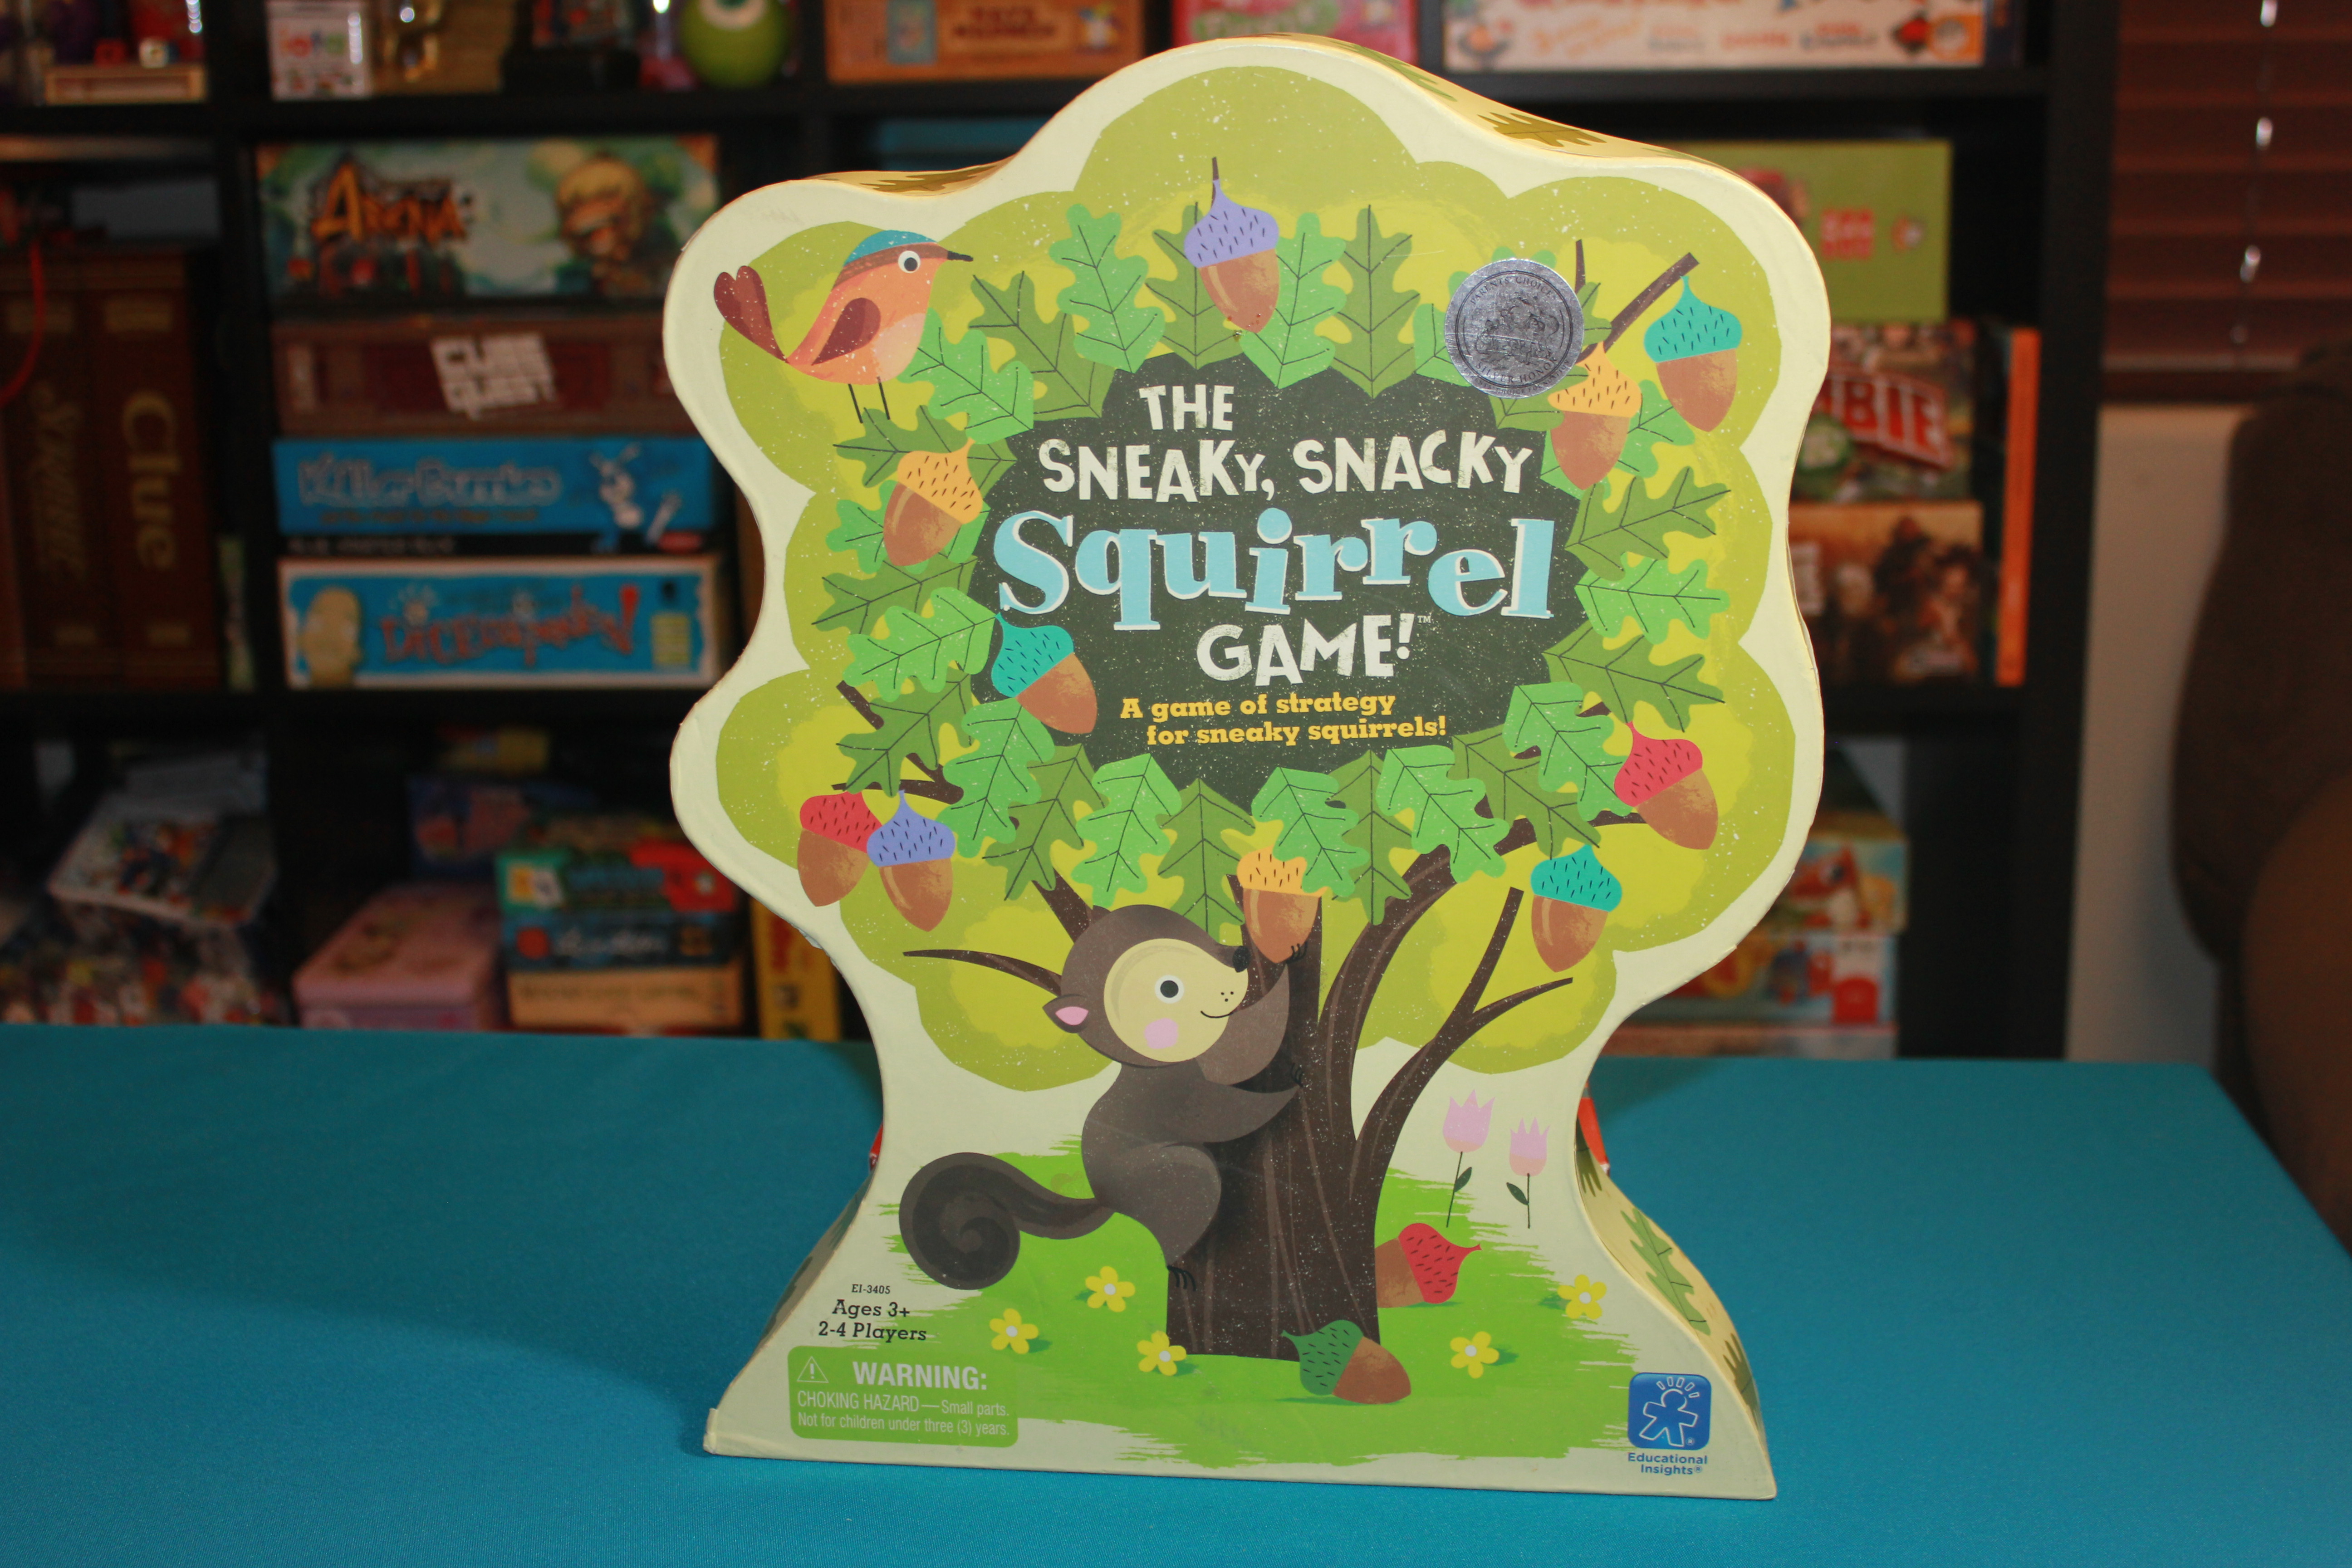 Sneaky, Snacky Squirrel Game